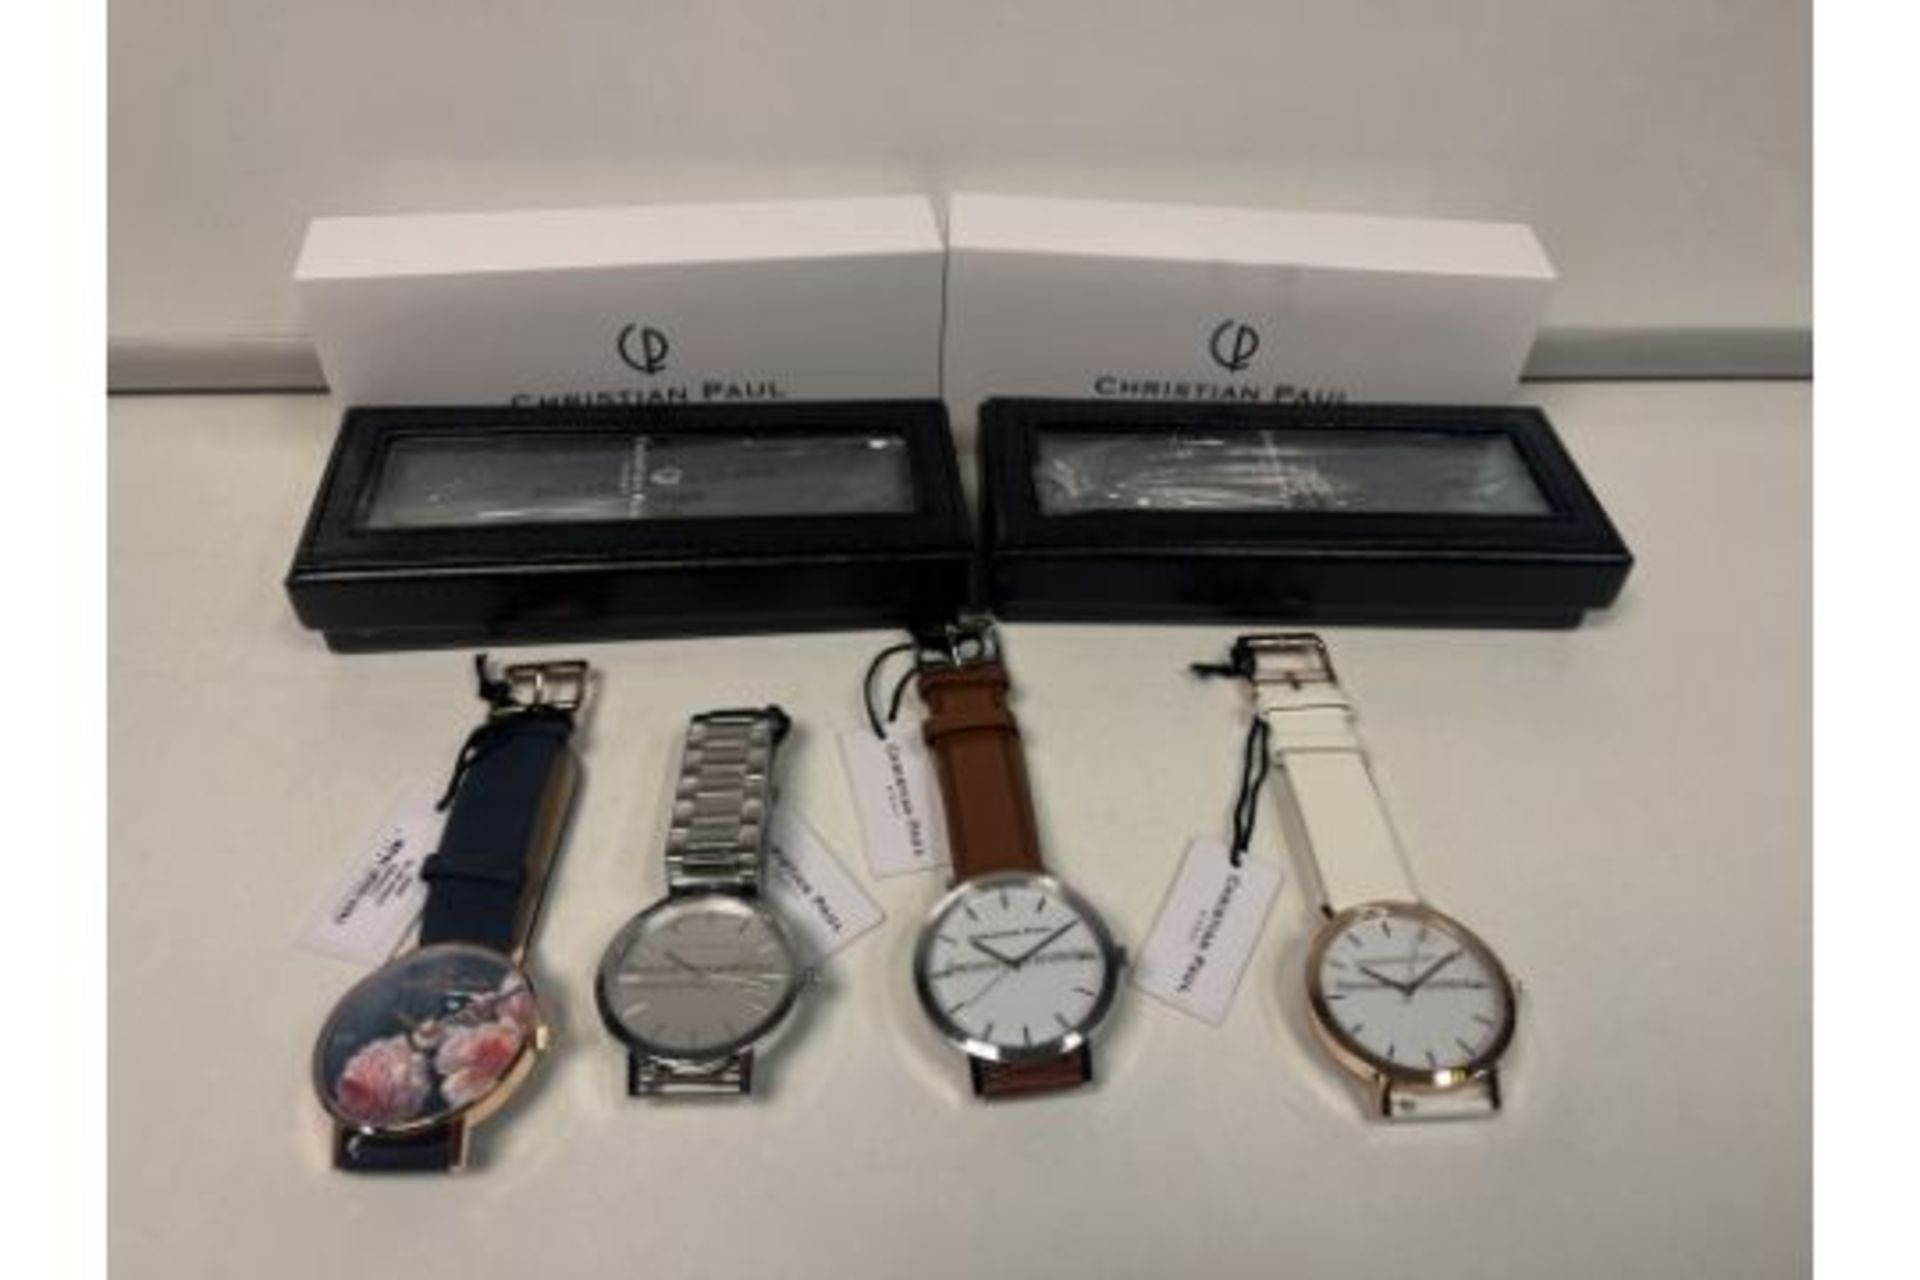 3 X BRAND NEW CHRISTIAN PAUL LUXURY WATCHES IN VARIOUS DESIGNS RRP £99-129 EACH OFF